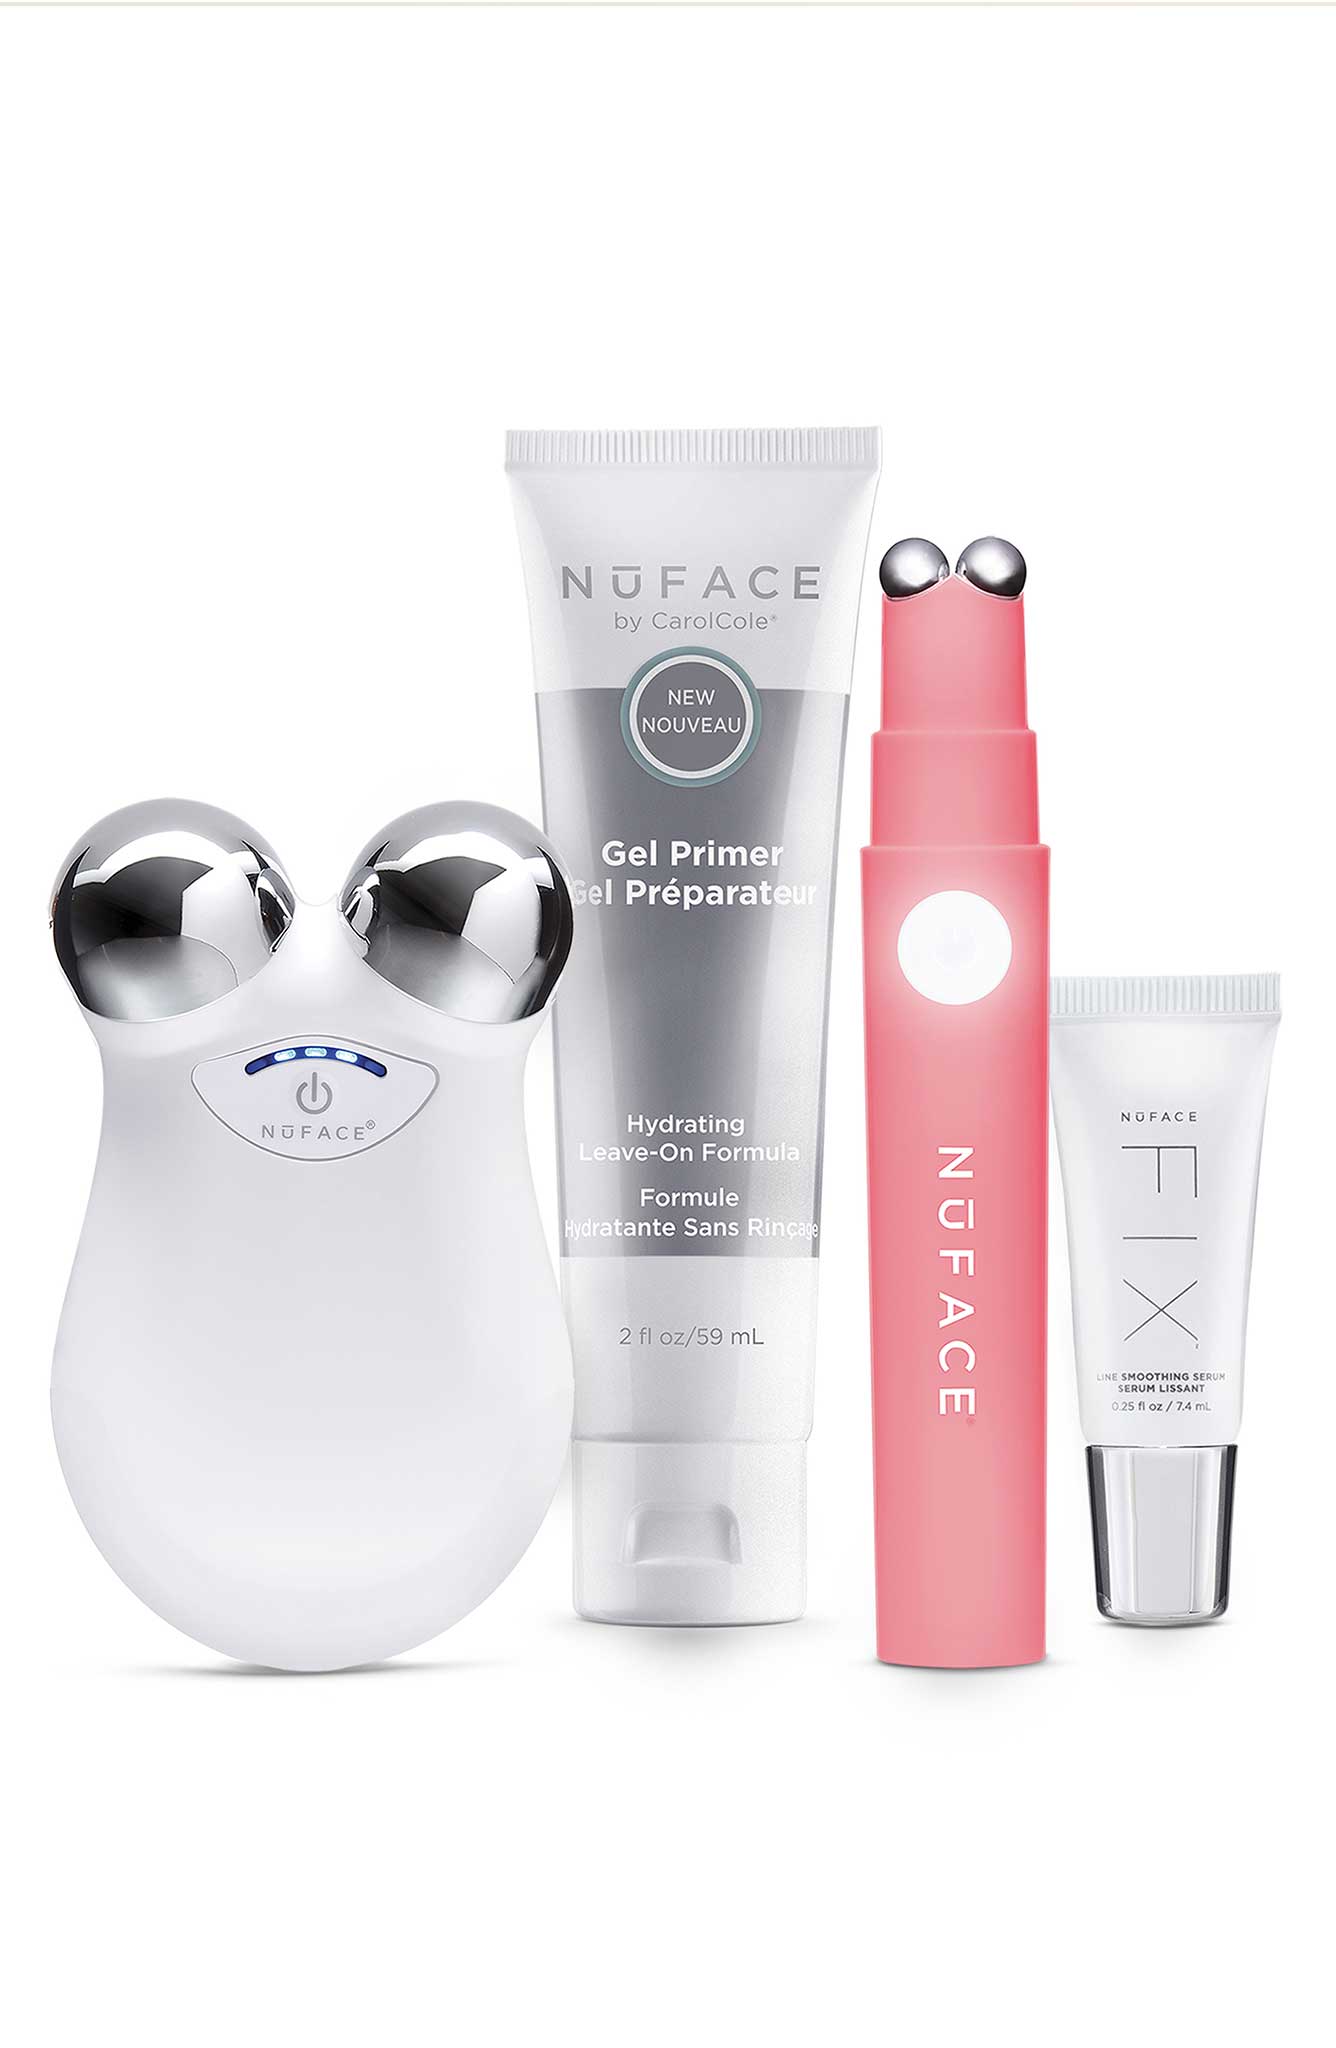 NuFACE Complete Facial Kit: I like giving my face an instant lift and contour with these microcurrent devices. The best trick is from co-founder, Tera Peterson, what she calls the “lip flick”…you can use the NuFACE Fix device around your lips and in 3 minutes they look fuller and plumper, no injections needed!